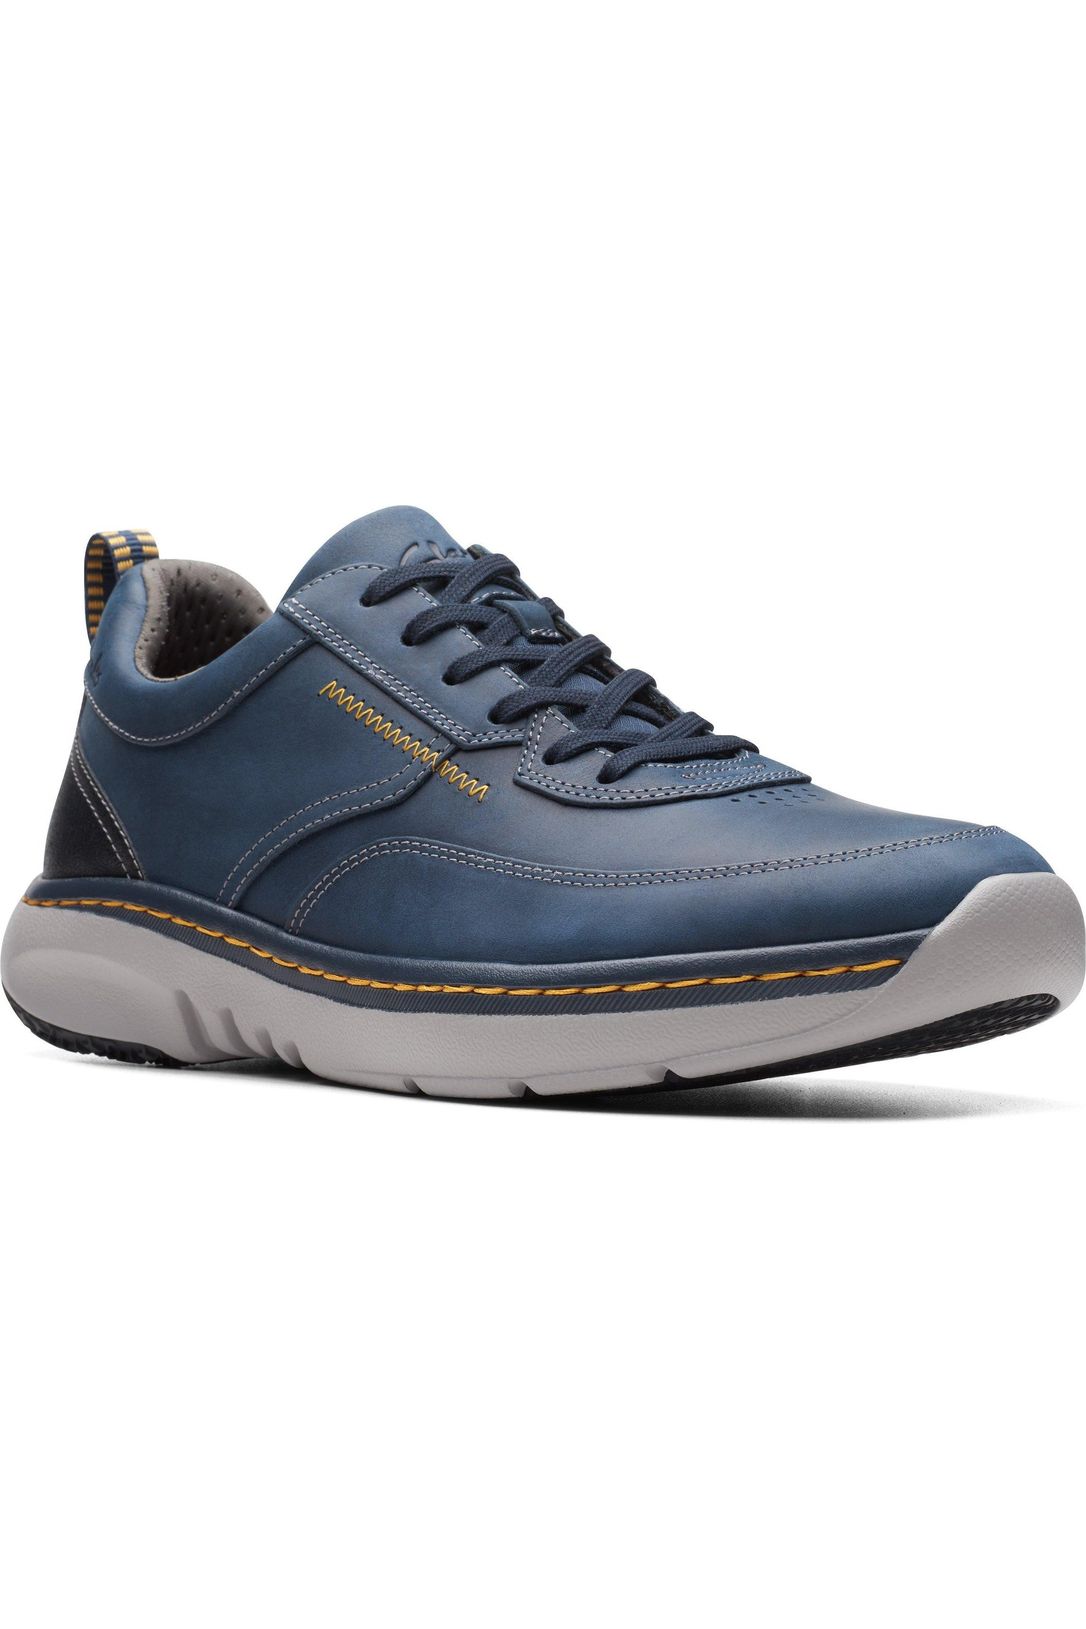 Clarks ClarksPro Lace in Navy Leather